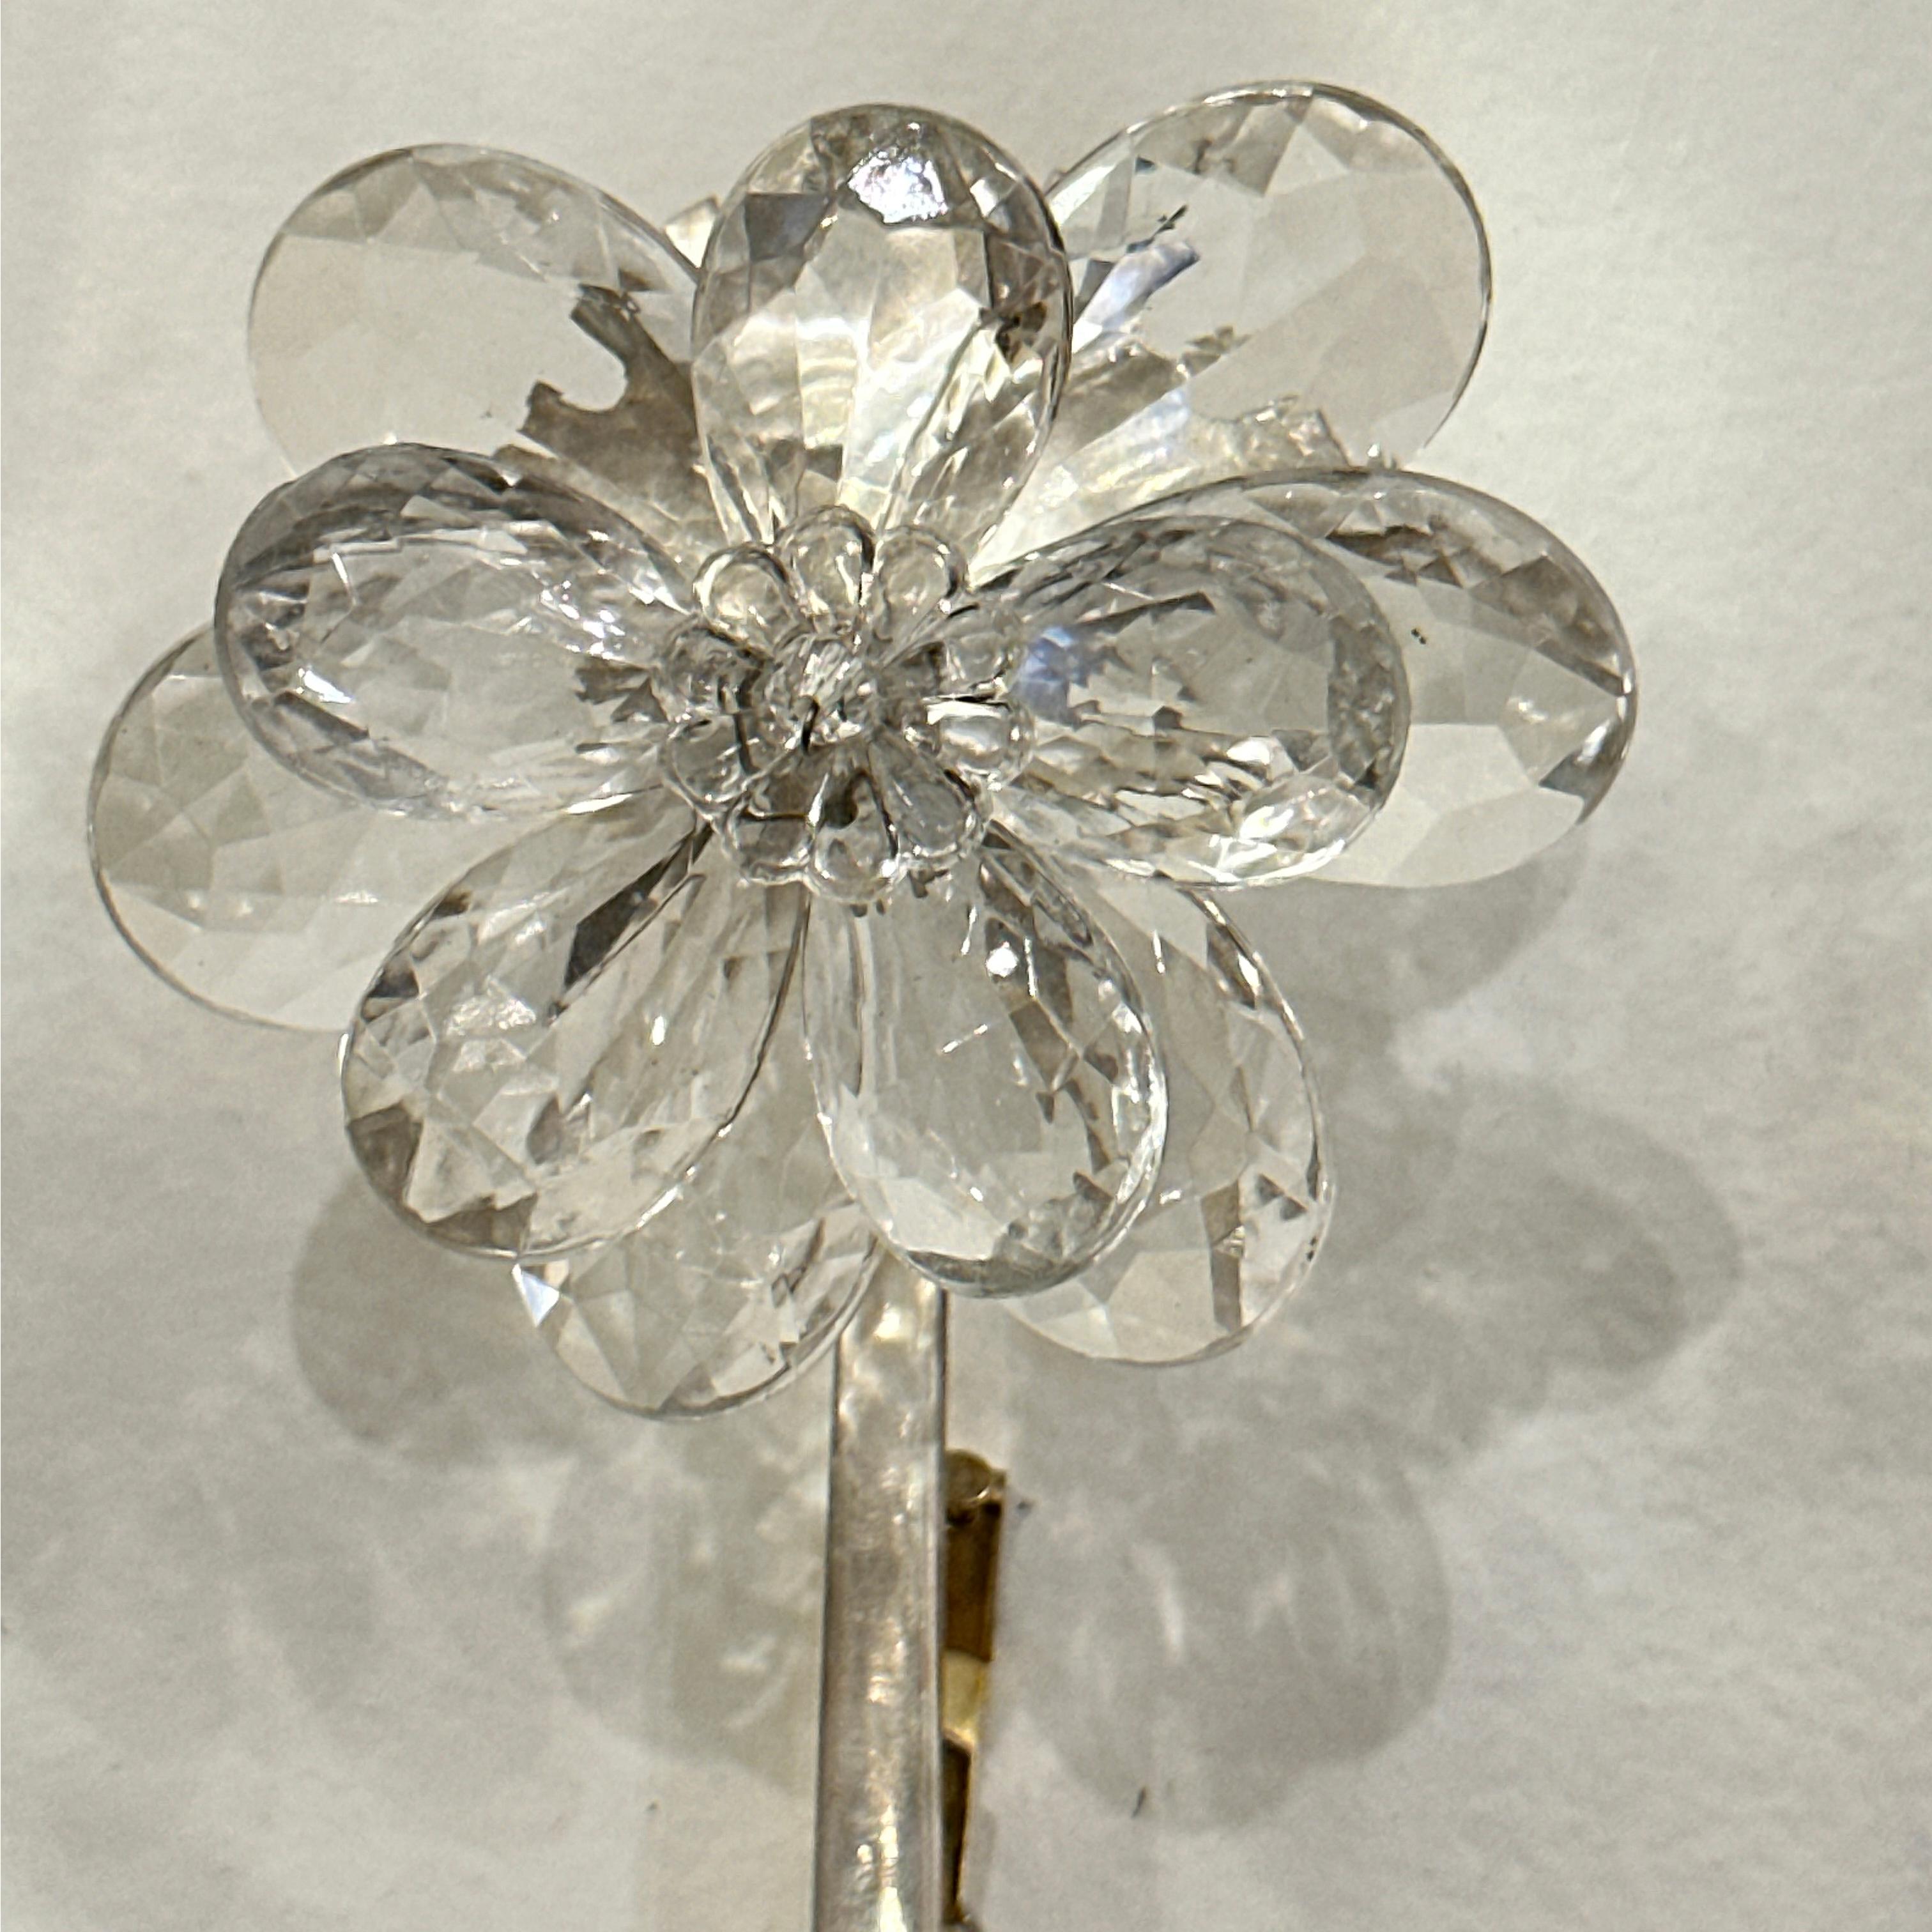 Set of 4 silver-plated, circa 1930's sconces with mirrored leaves and crystal flowers. Sold per pair.

Measurements:
Height: 21